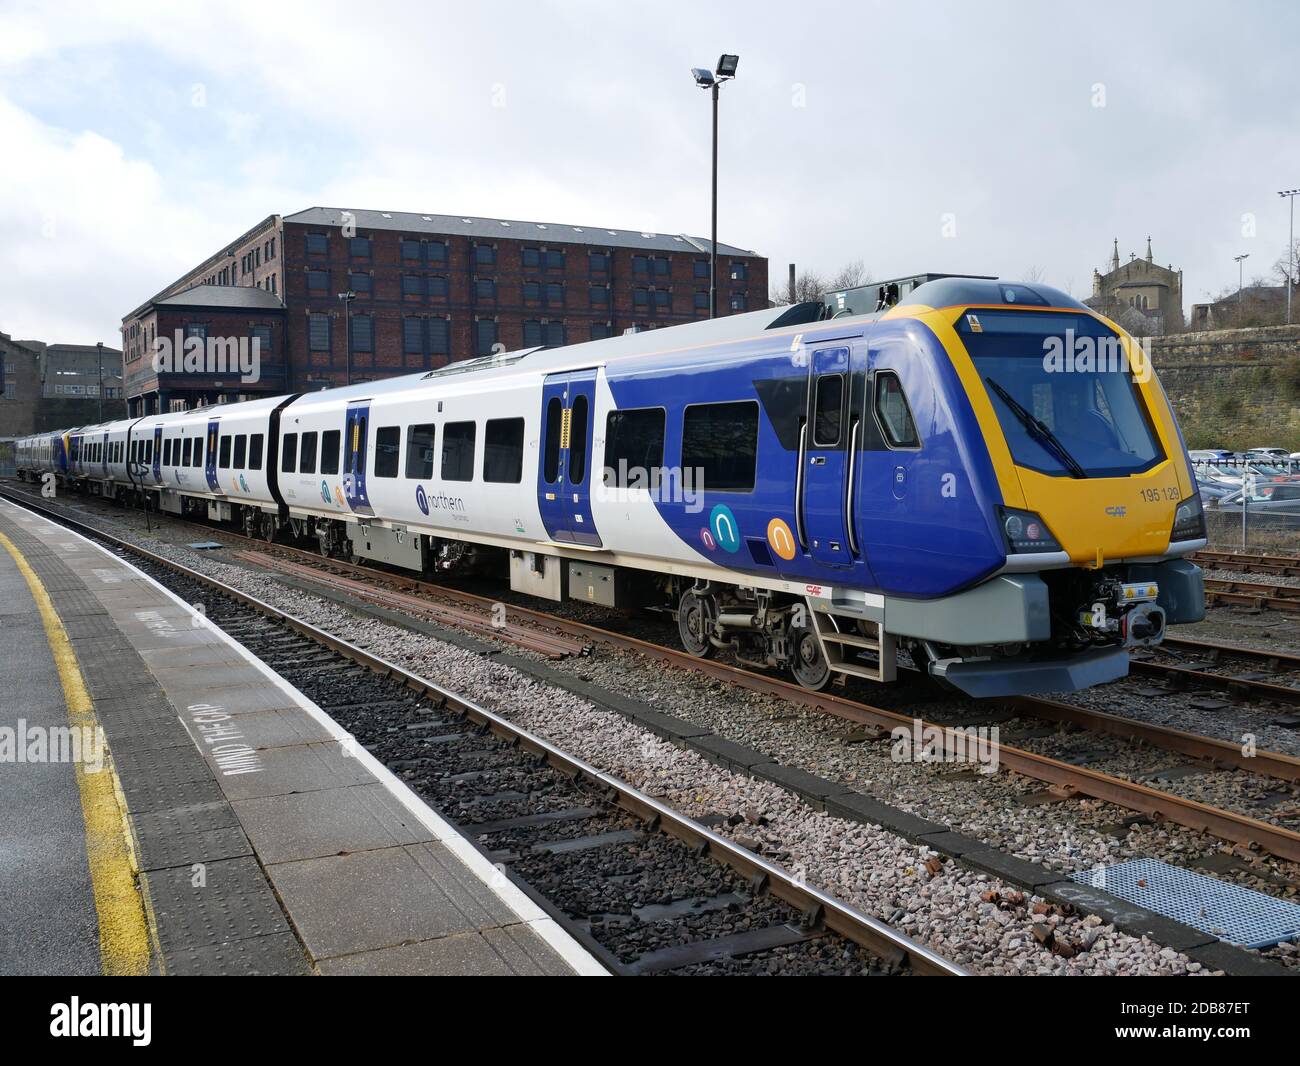 Yellow blue and silver multi carriage railway train parked at railway station red brick building in background Stock Photo